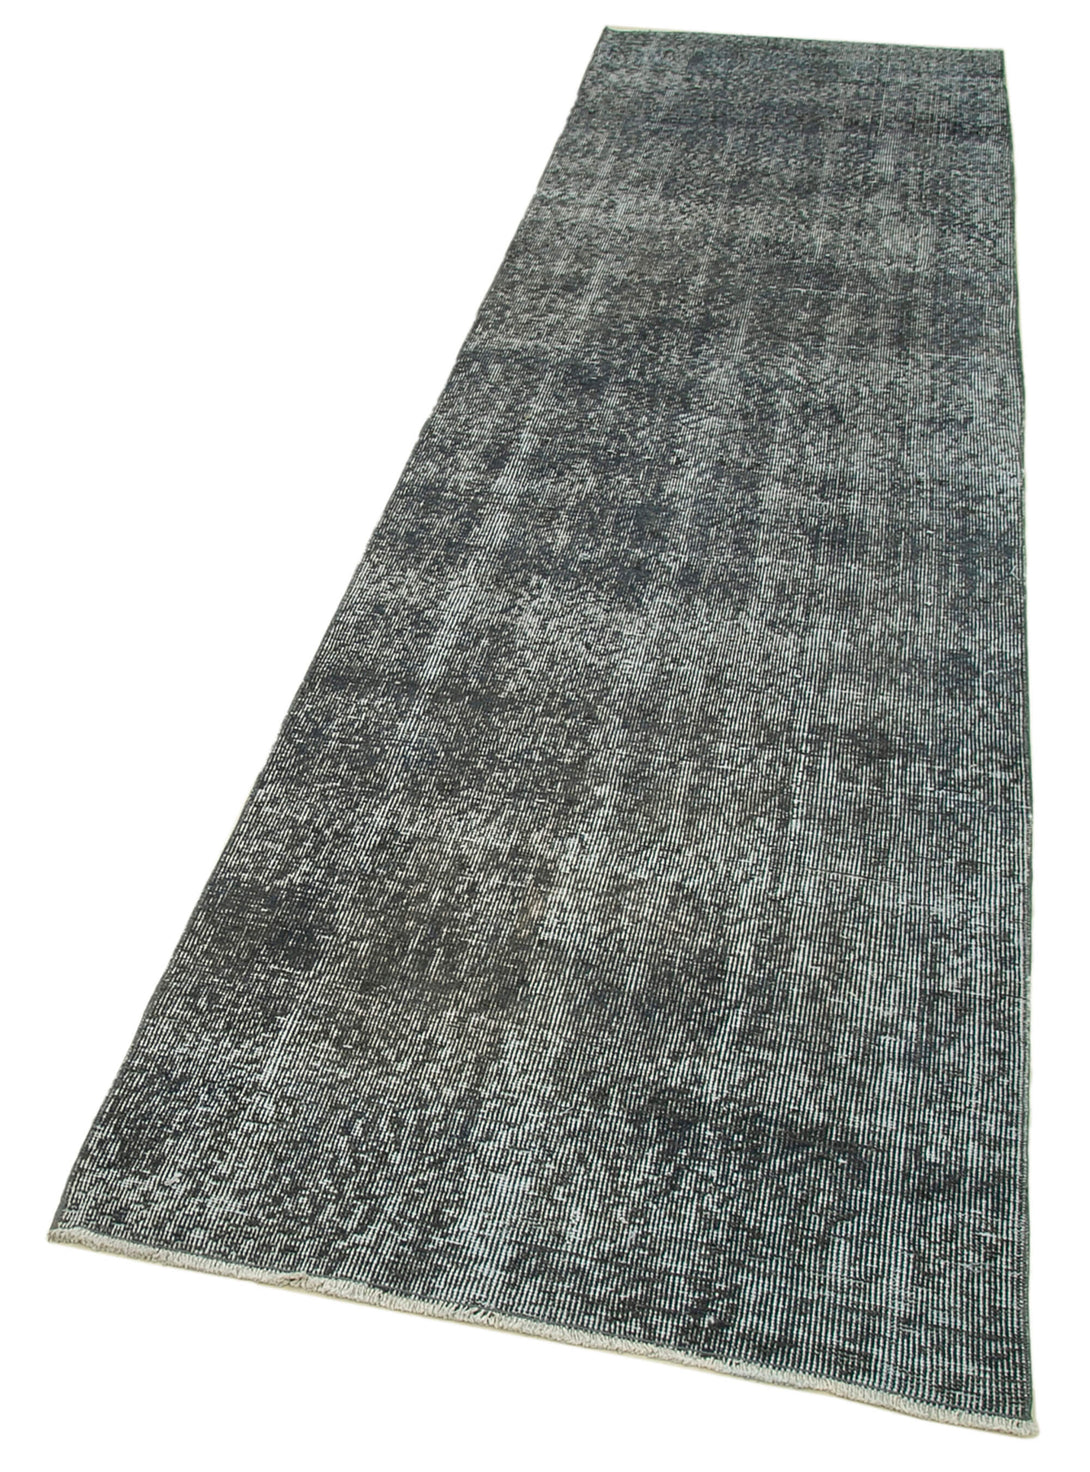 Handmade Overdyed Runner > Design# OL-AC-37199 > Size: 2'-8" x 10'-0", Carpet Culture Rugs, Handmade Rugs, NYC Rugs, New Rugs, Shop Rugs, Rug Store, Outlet Rugs, SoHo Rugs, Rugs in USA